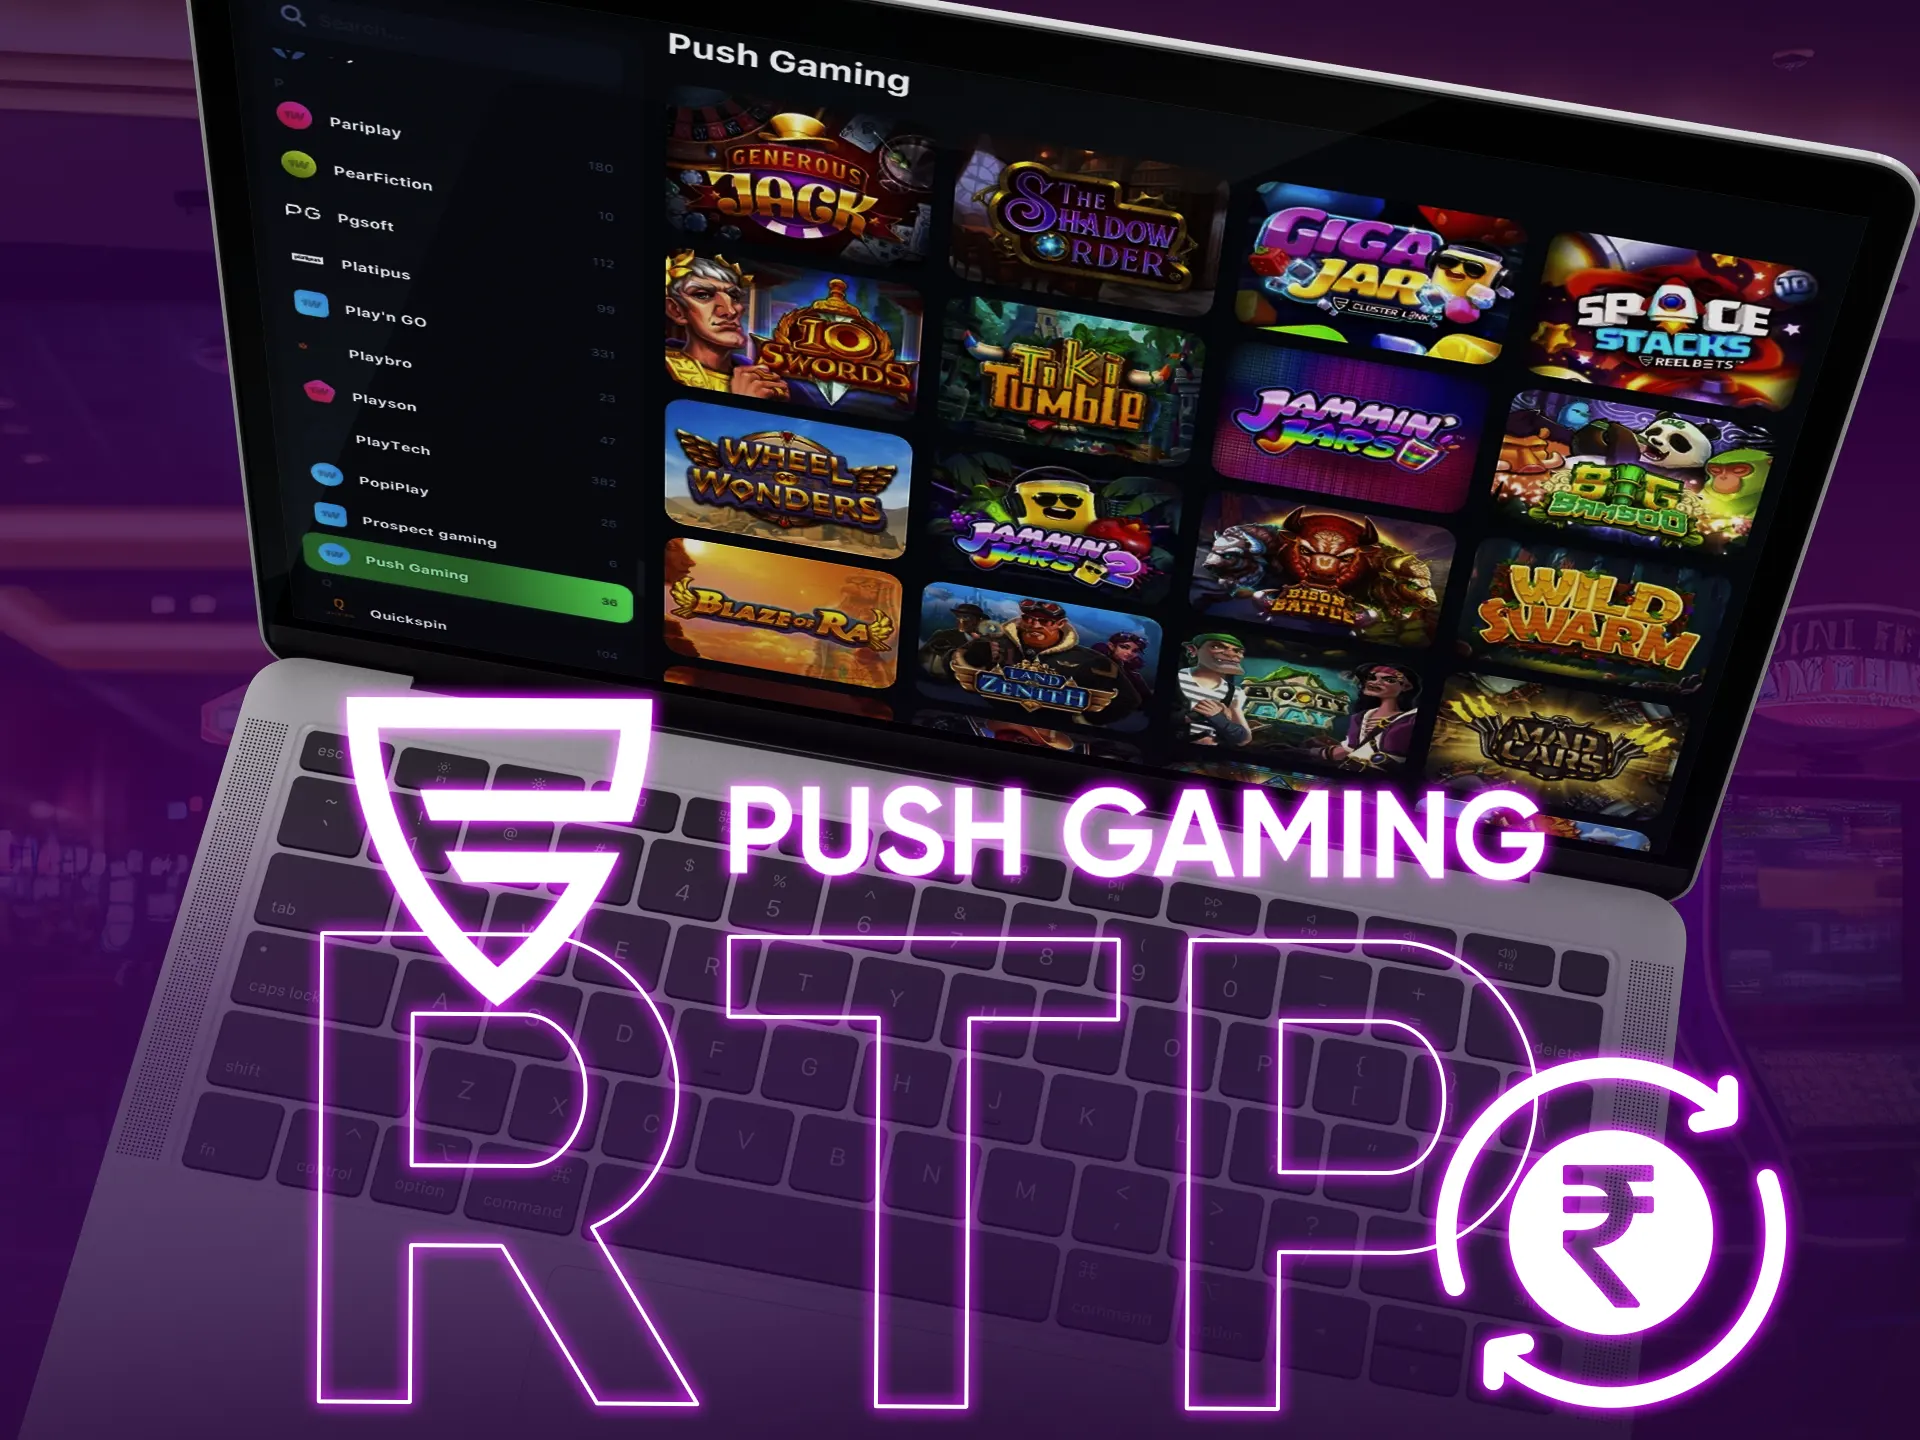 Push Gaming offering games with high RTP rate.